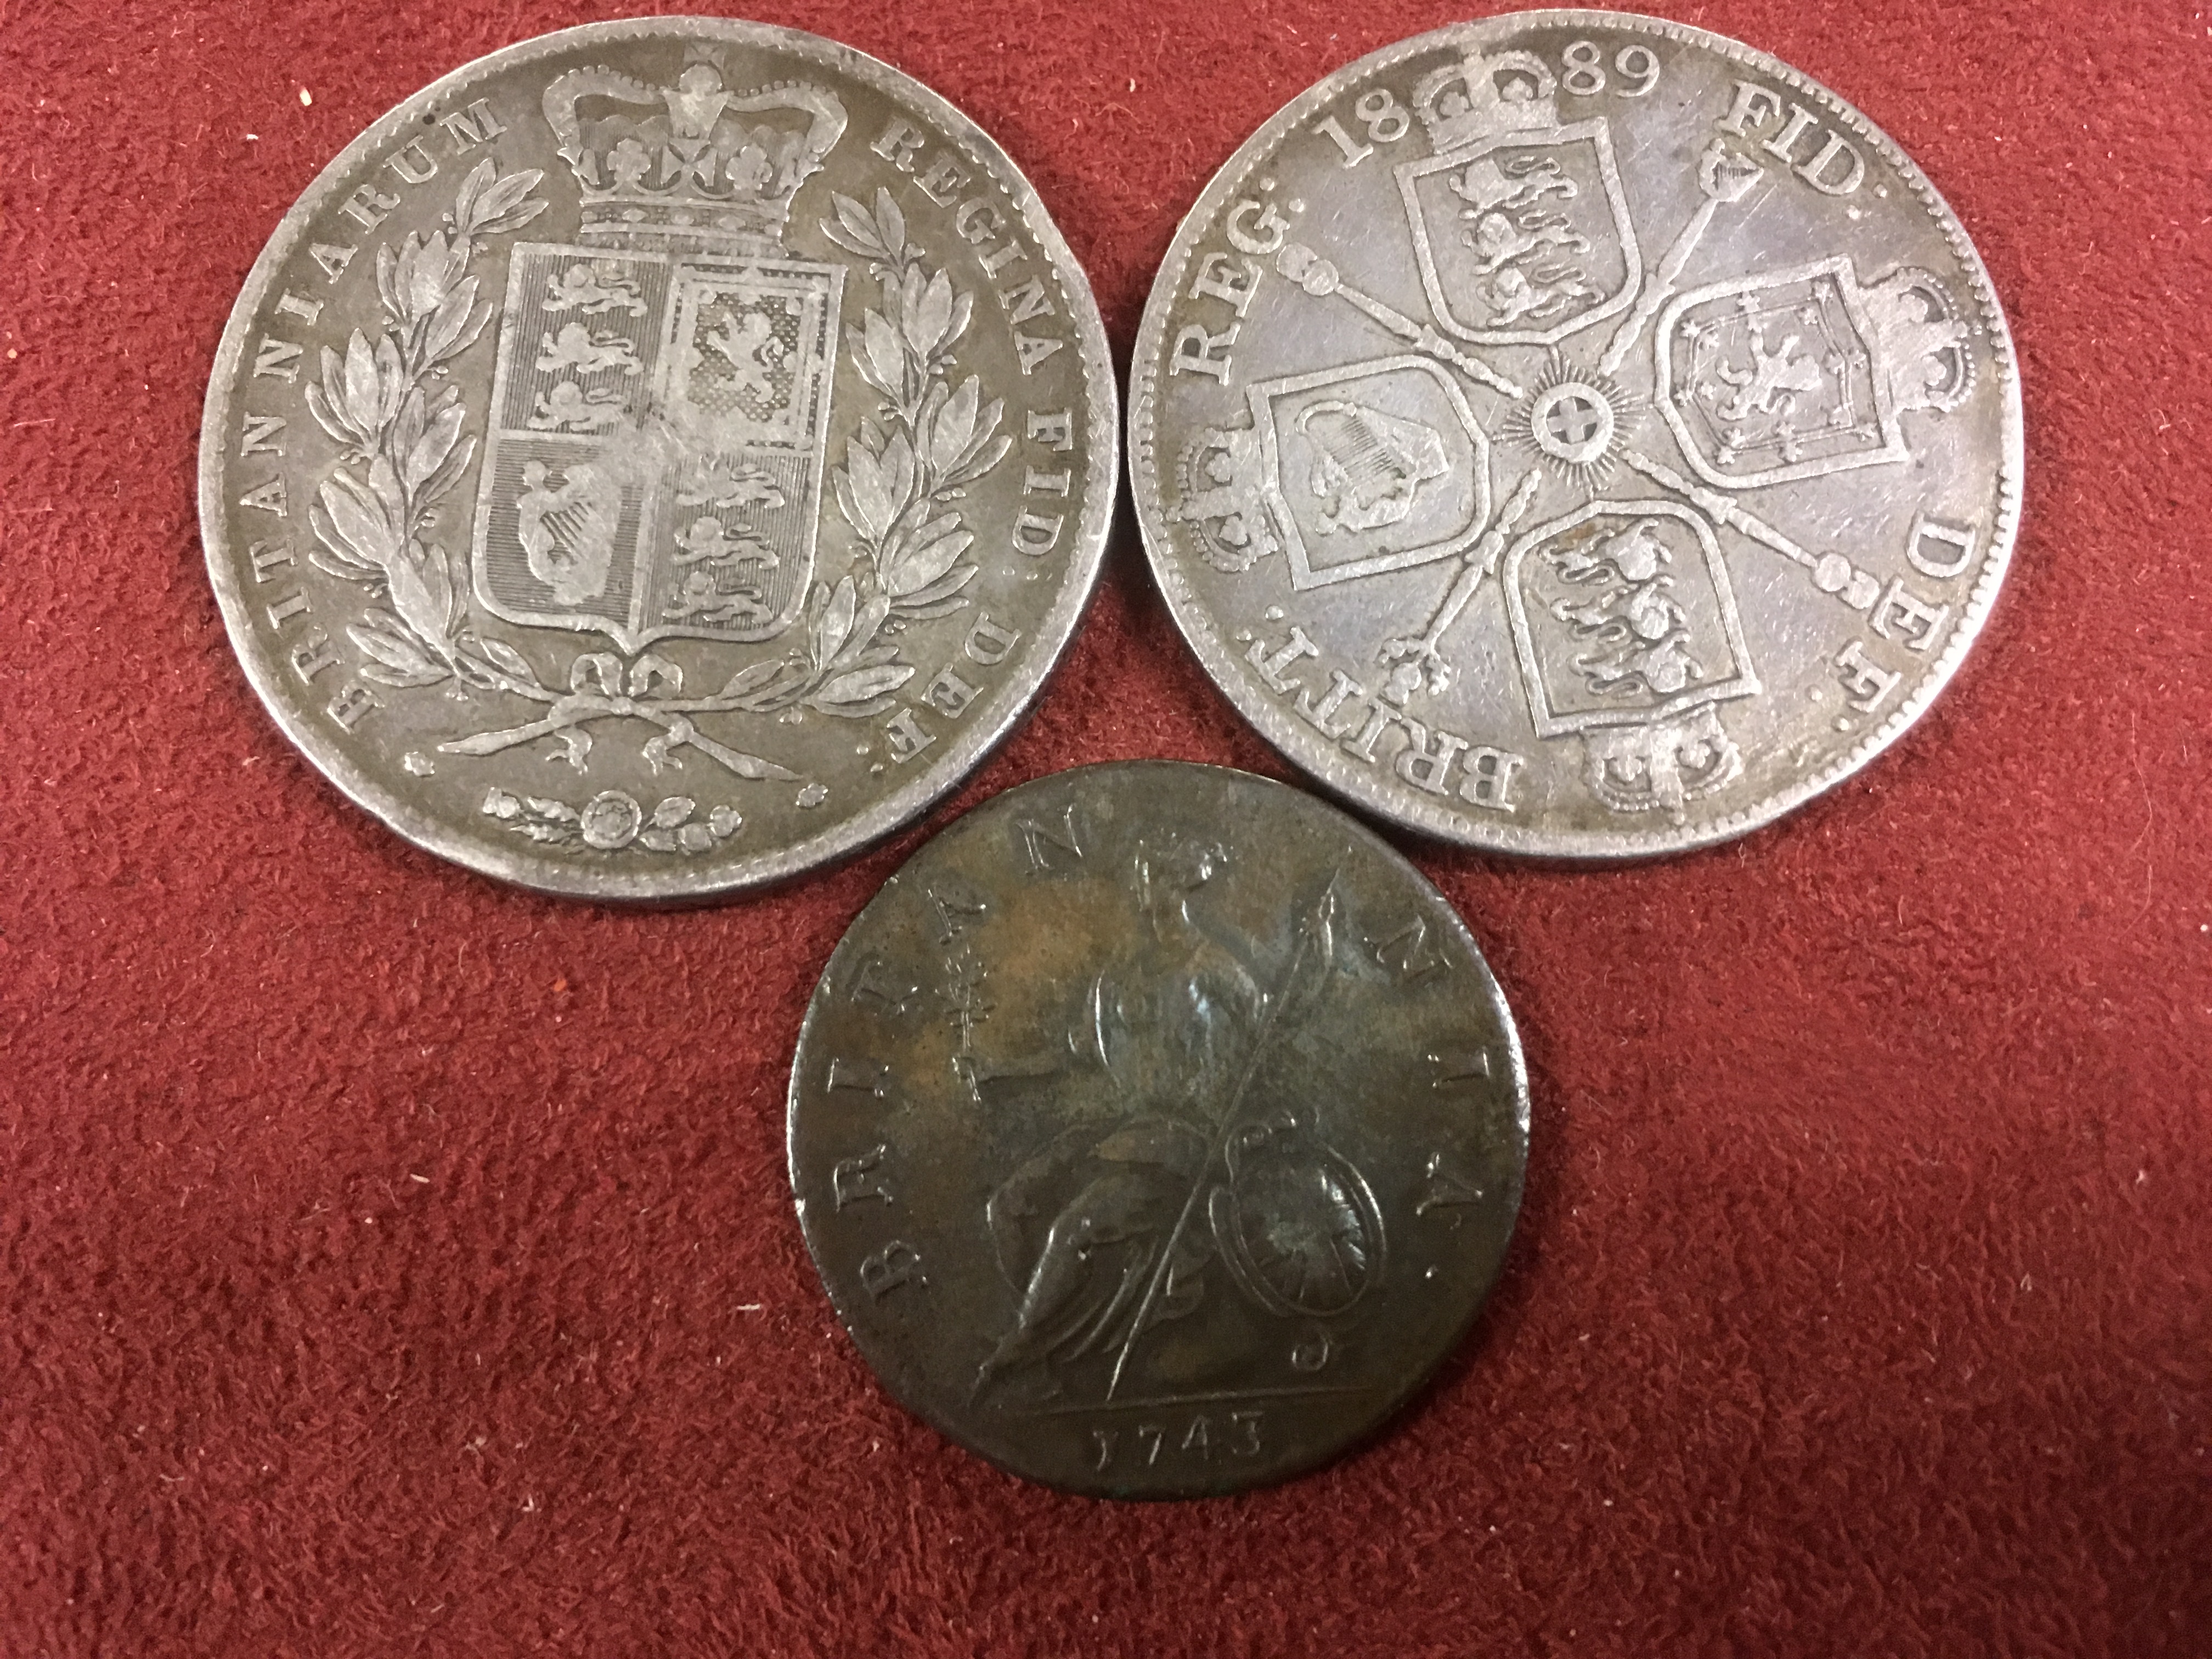 TUB MIXED UK AND OVERSEAS COINS, FEW SILVER INCLUDING 1844 CROWN, 1889 DOUBLE FLORIN ETC. - Image 3 of 4